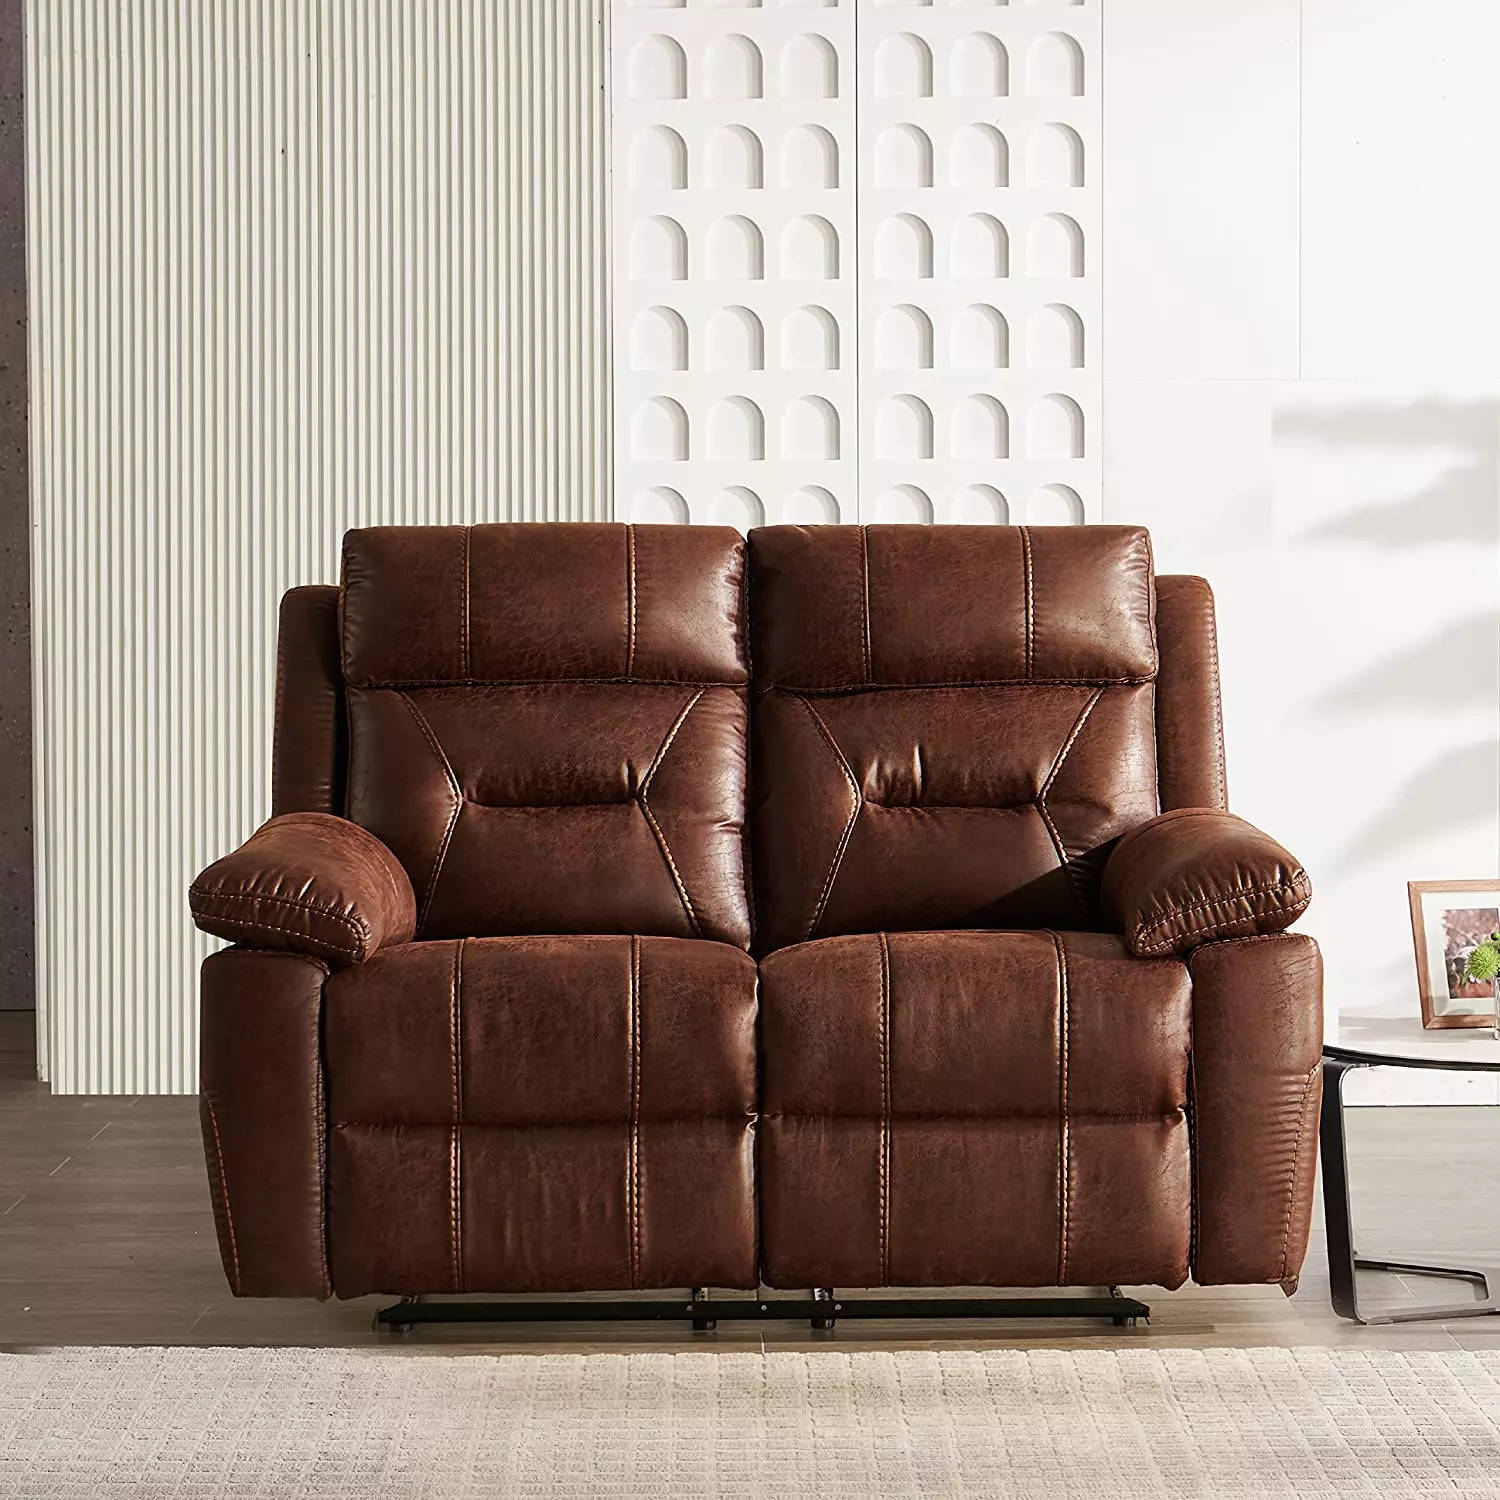 How durable is my reclining sofa fake leather fabric?